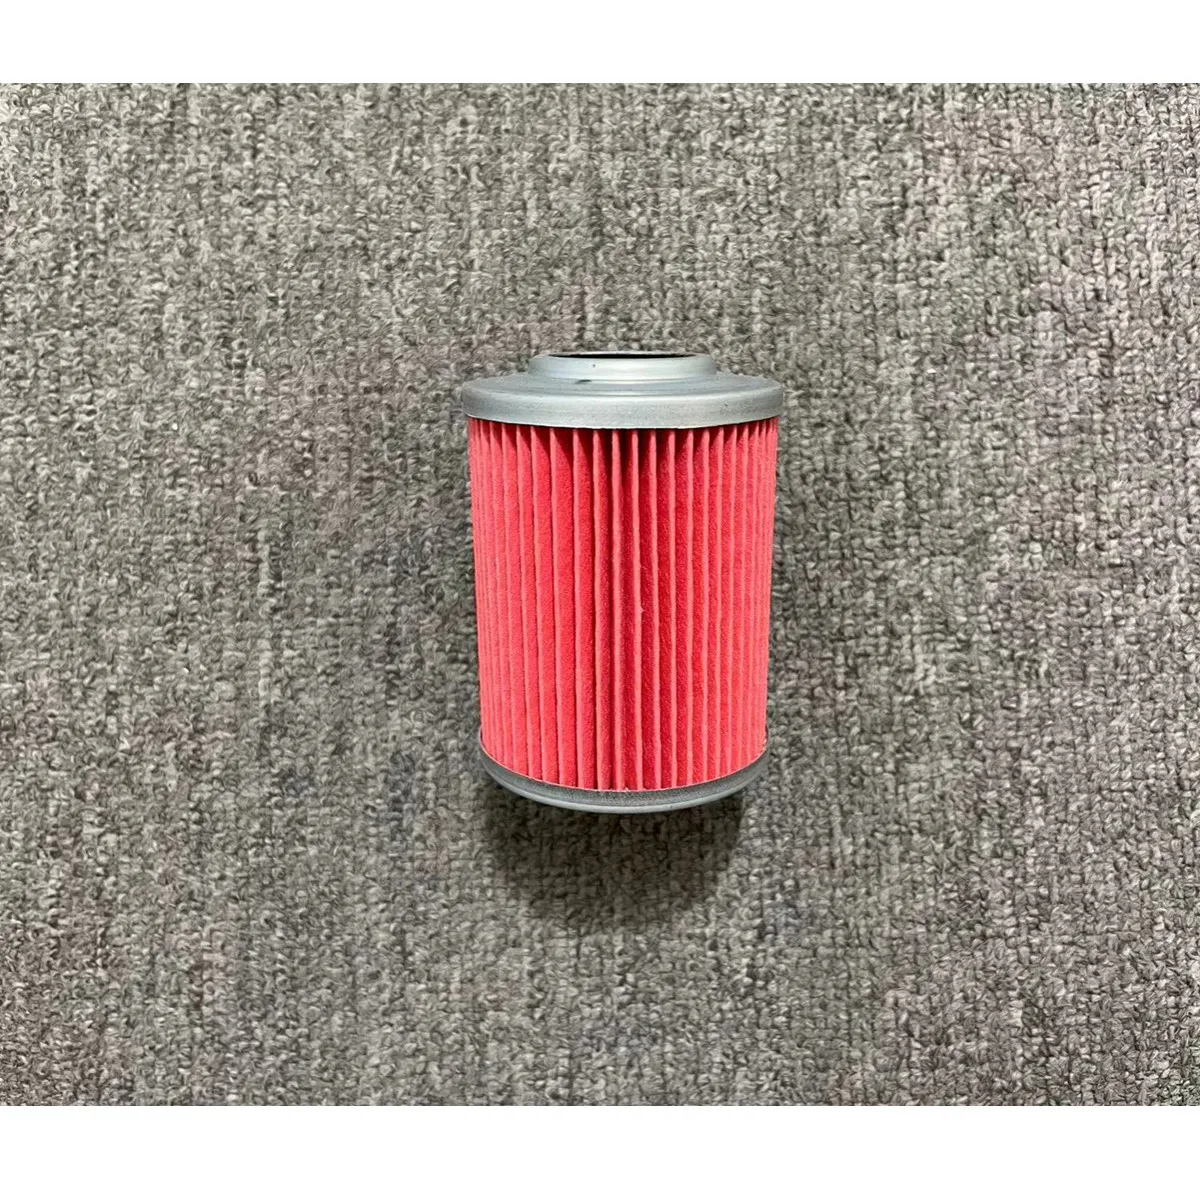 

Motorcycle Engine Oil Filter For APRILIA ETV1000 CAPONORD RST1000 FUTURA RSV1000 MILLE R SL1000